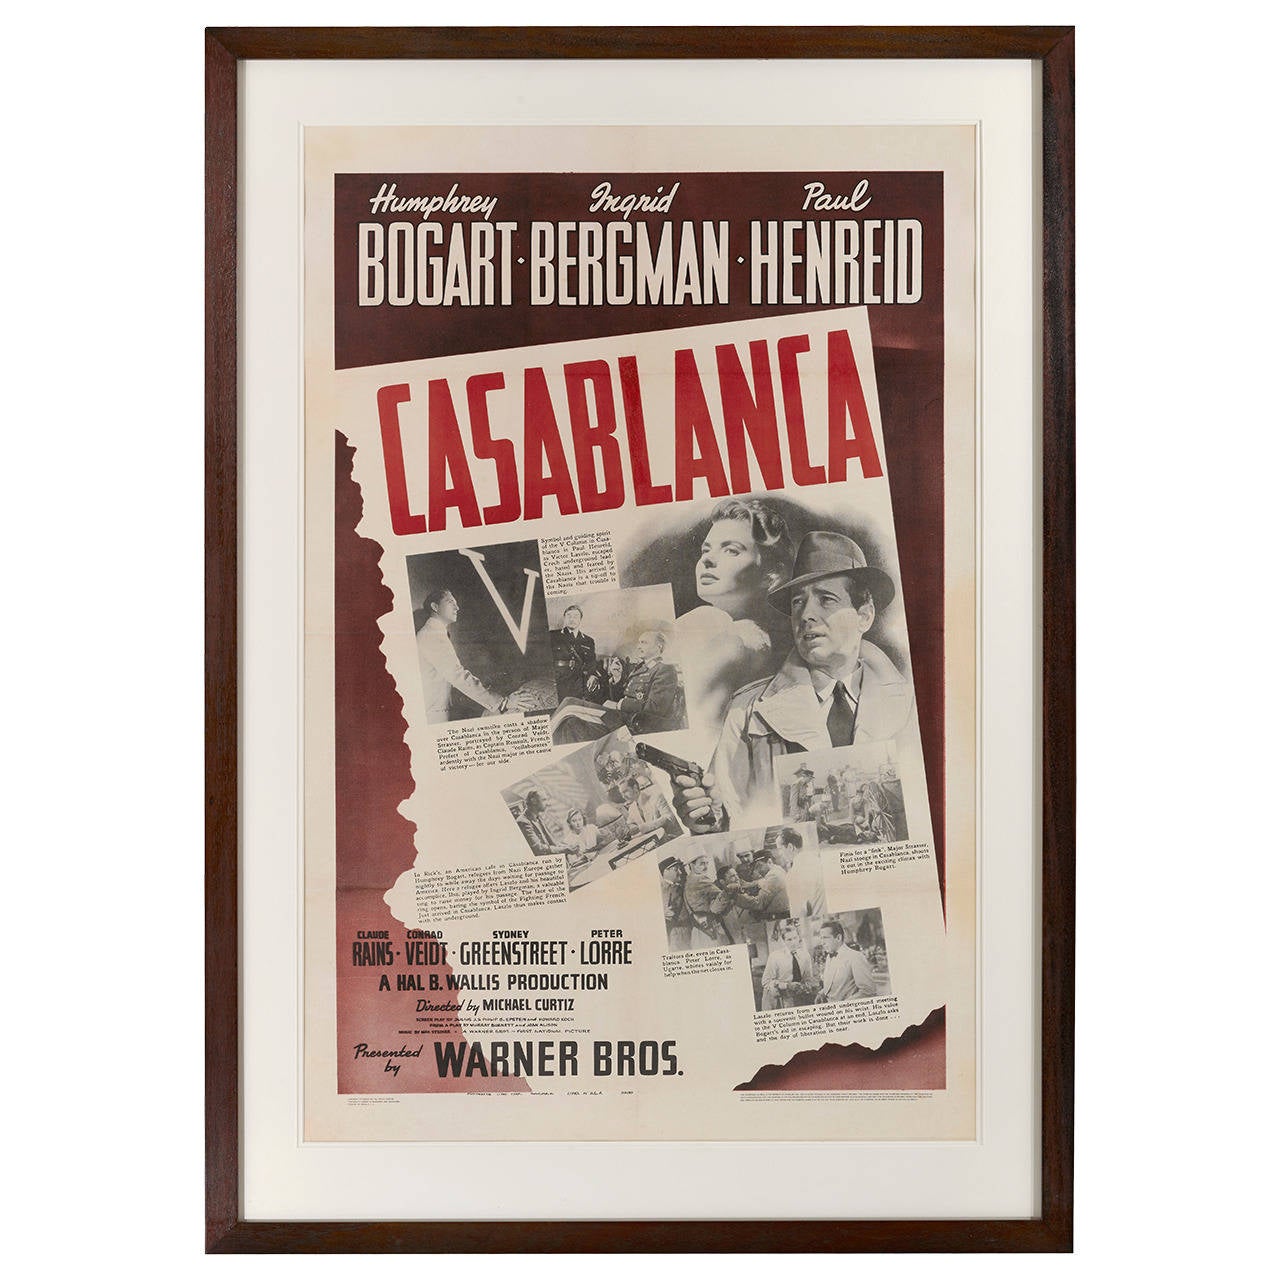 Original US Movie poster for the timeless classic Casablanca (1942)
This is one of the most collected titles and it is extremely hard to find any original release paper on this title.